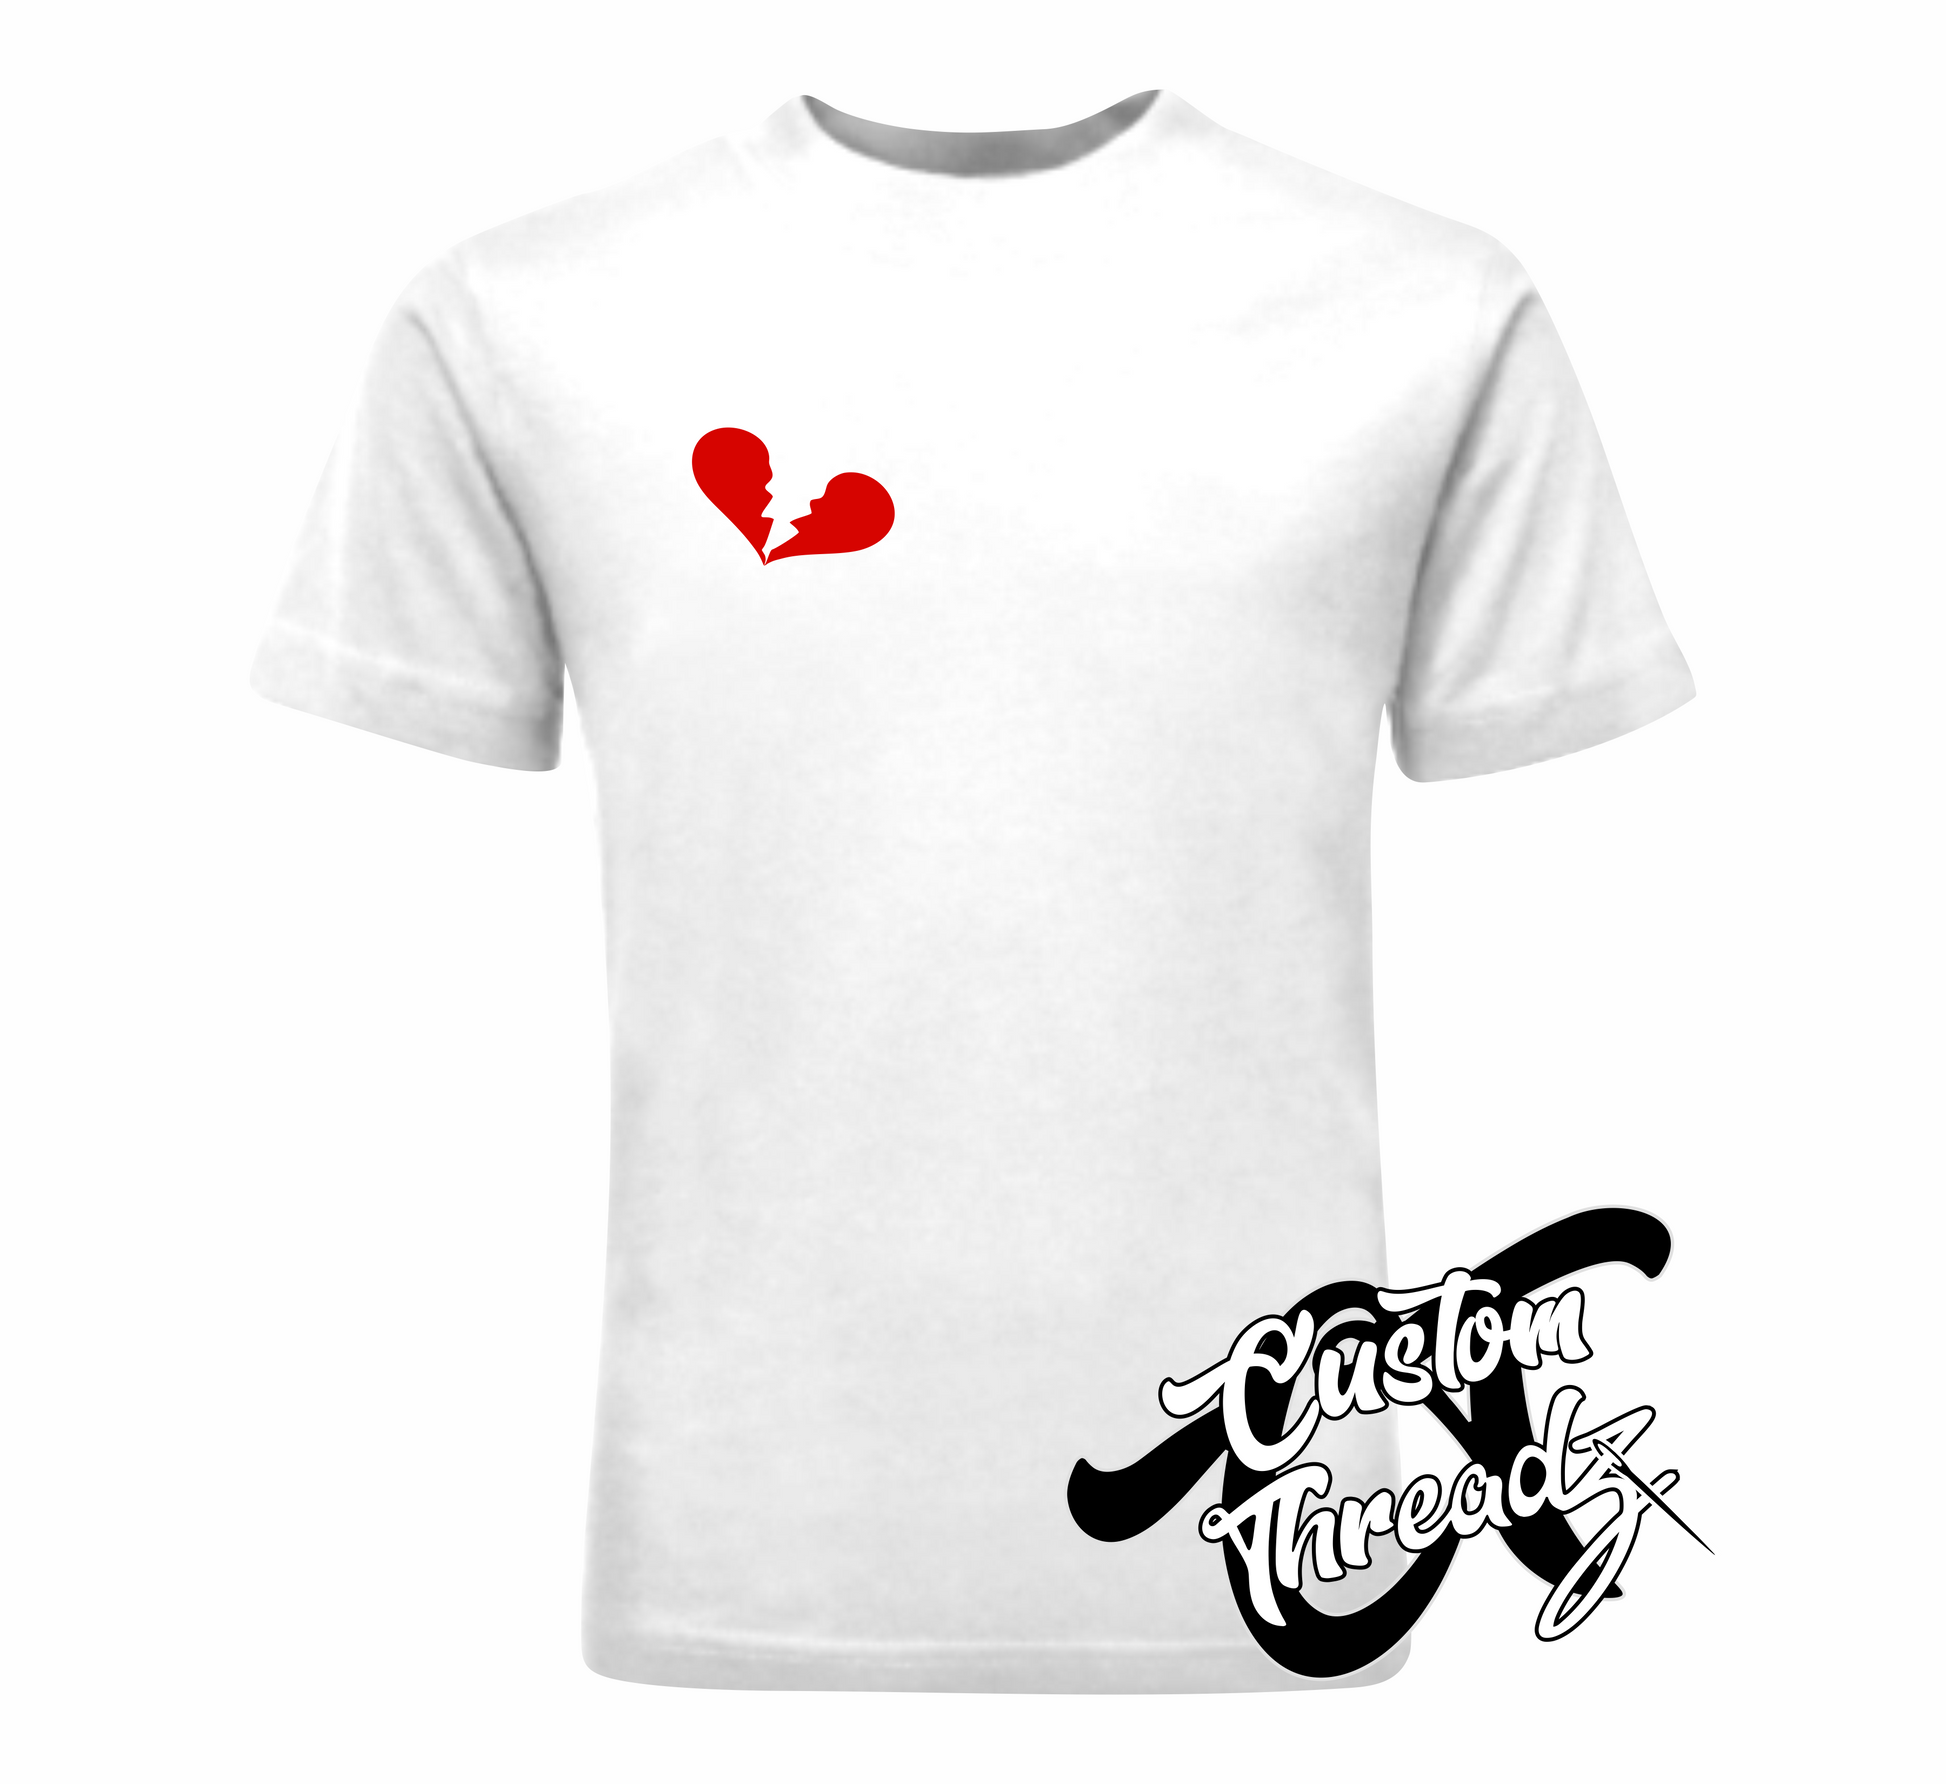 white tee with heartbreaker DTG printed design